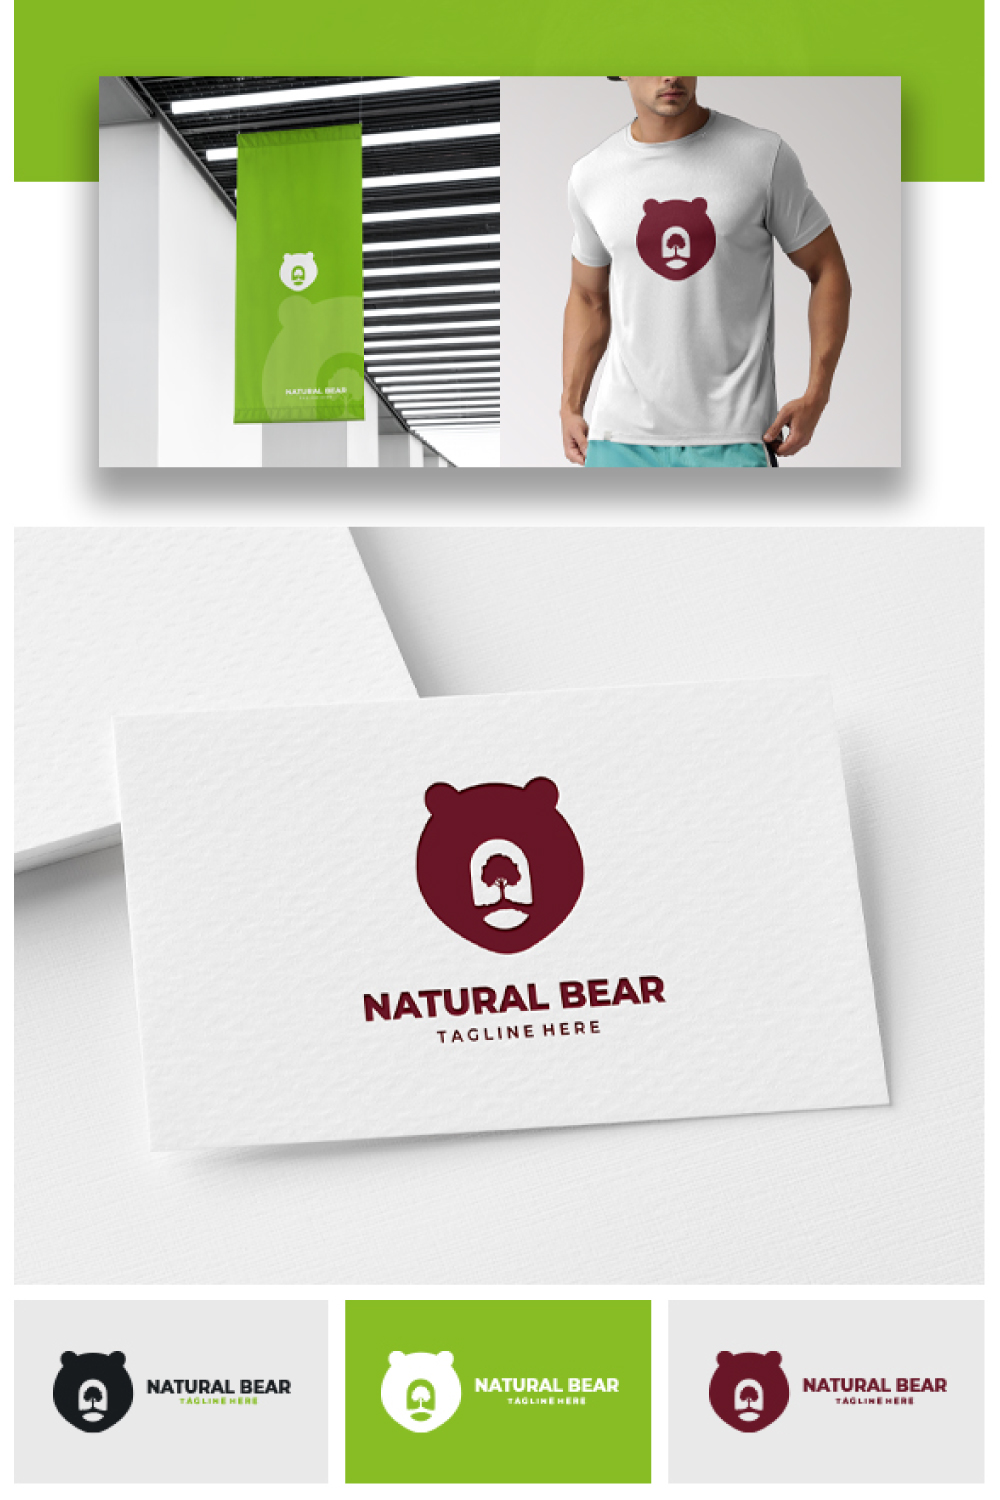 White and green business card with a bear on it.